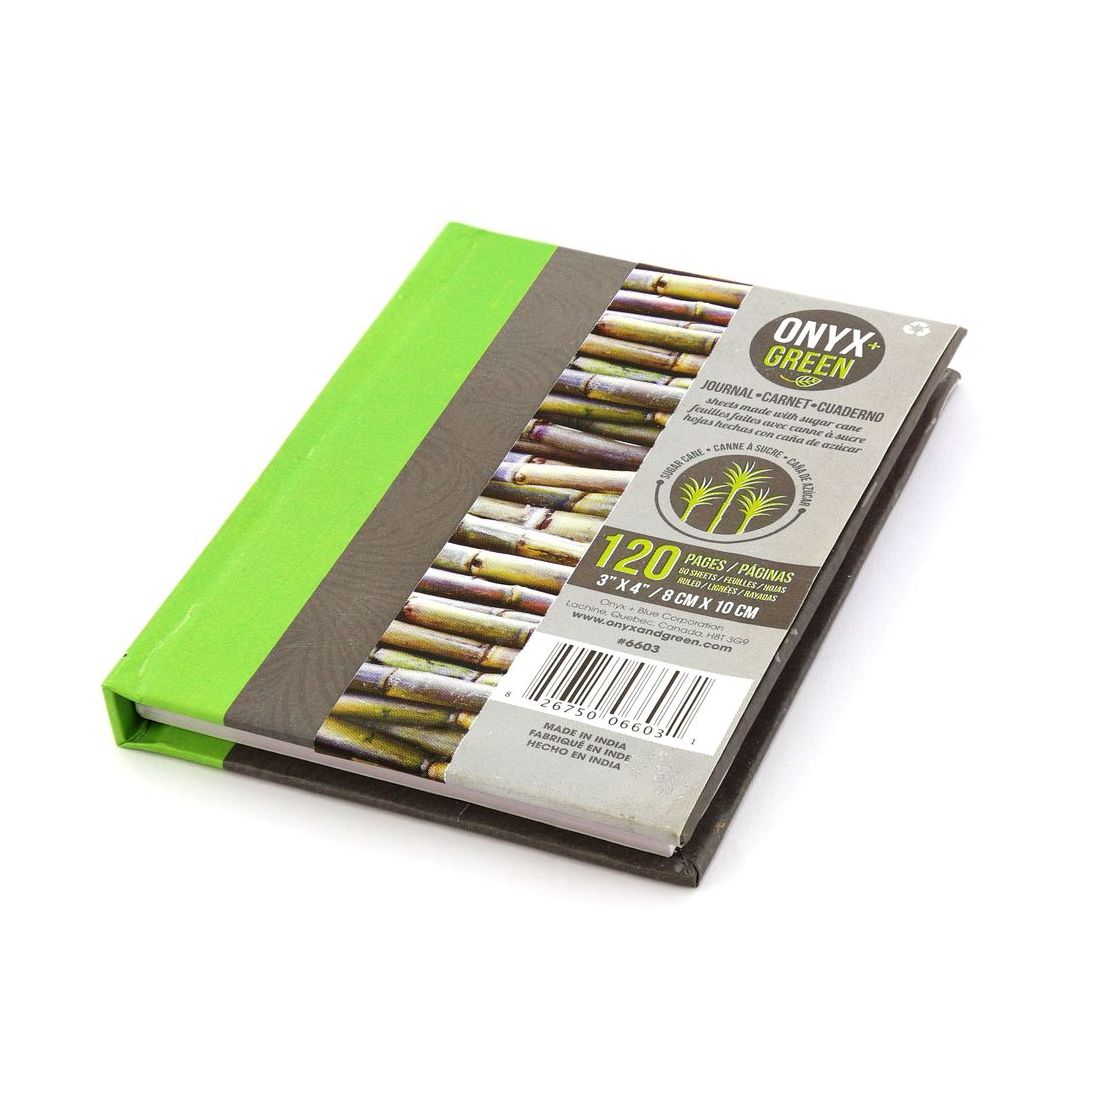 Onyx & Green Pocket Hard Cover Journal Notebook 64 Sheets of Sugar Cane Paper Ruled 3 x 4 Inches